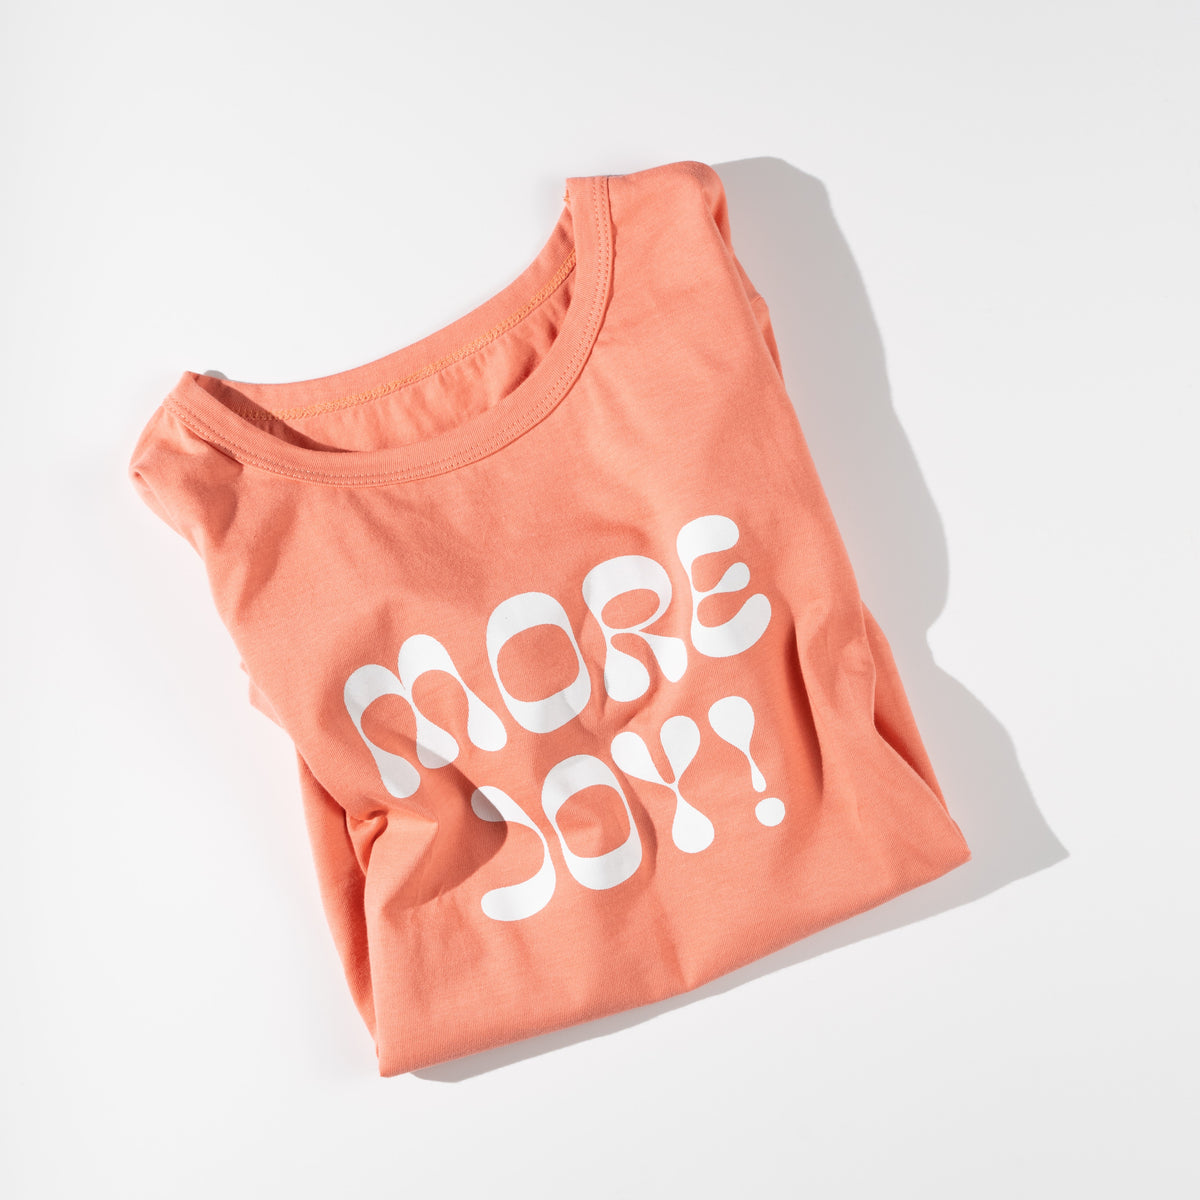 MORE JOY x BULLY ZERO T-SHIRT in Coral 🧡